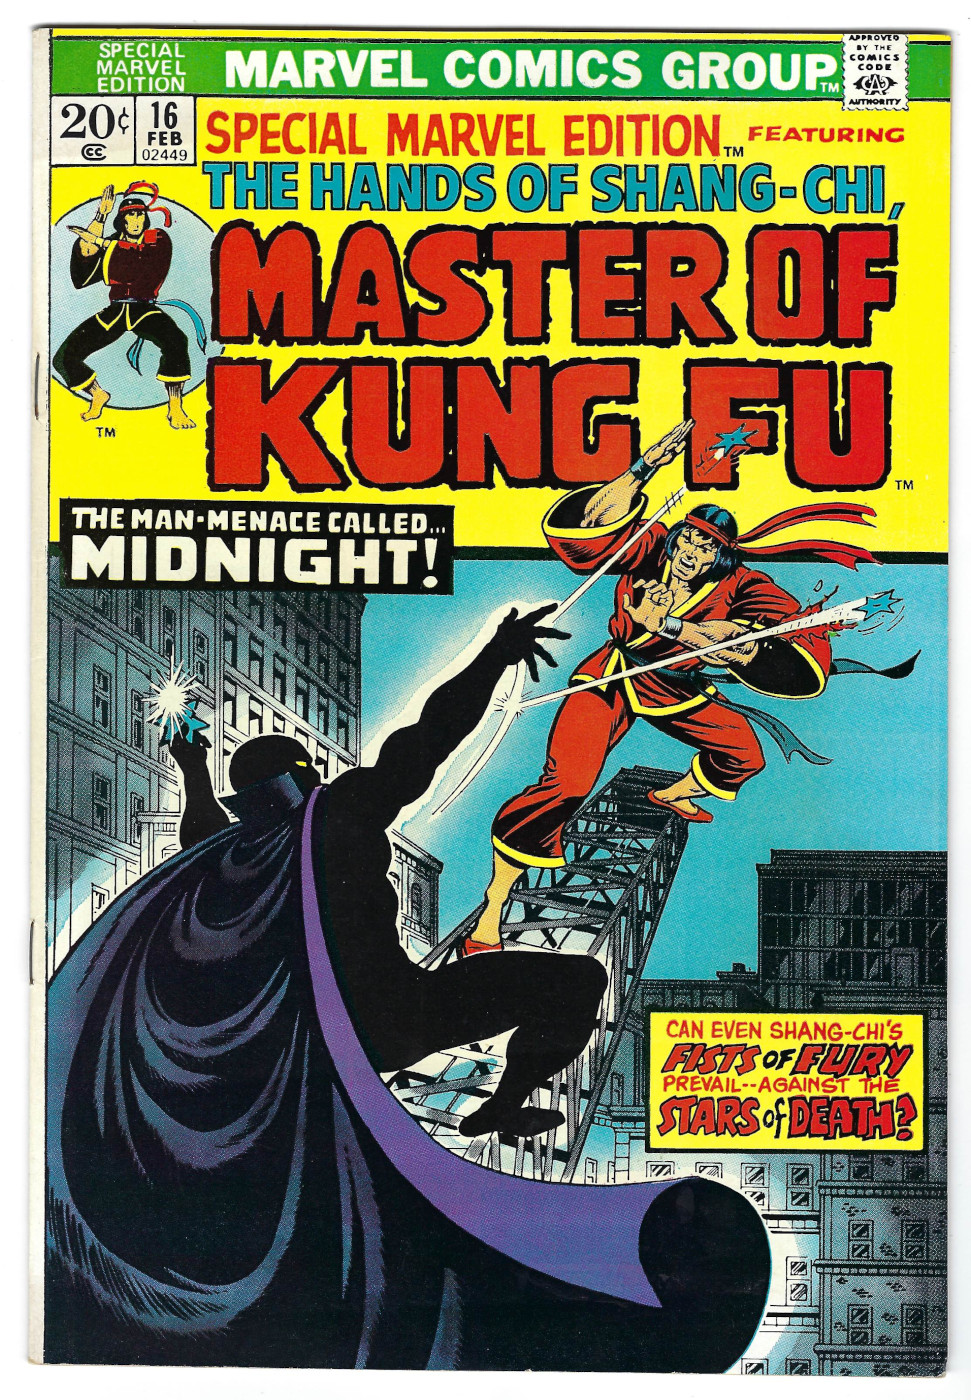 Marvel Comics Special Marvel Edition featuring Hands of Shang-Chi Master of Kung-Fu (1971) #16: 1st Appearance of Midnight 1